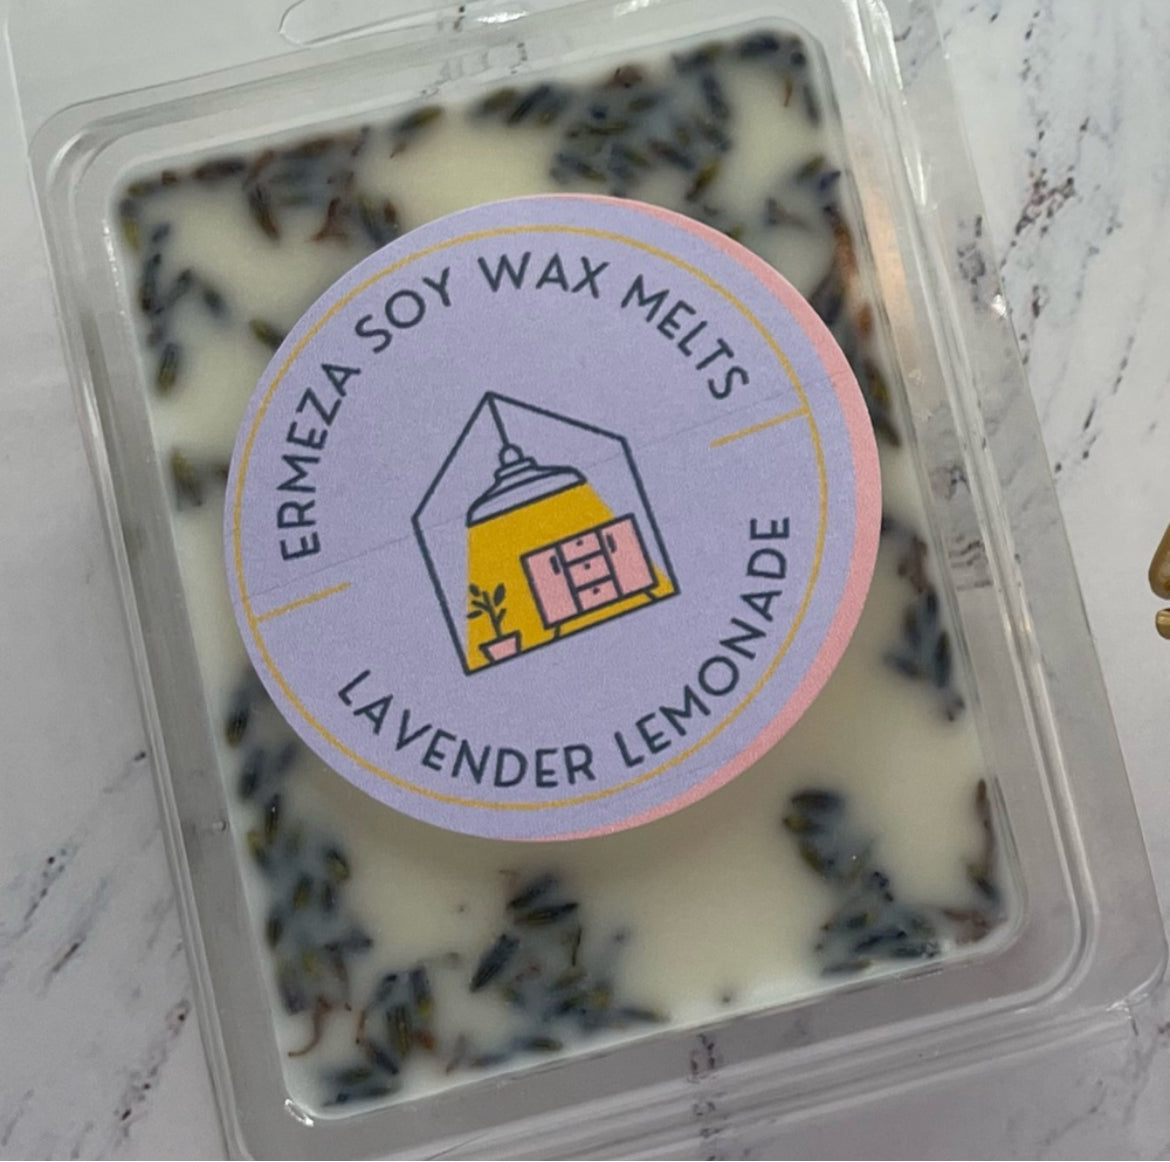 Hand Poured Soy Wax Melts, 2.5 oz